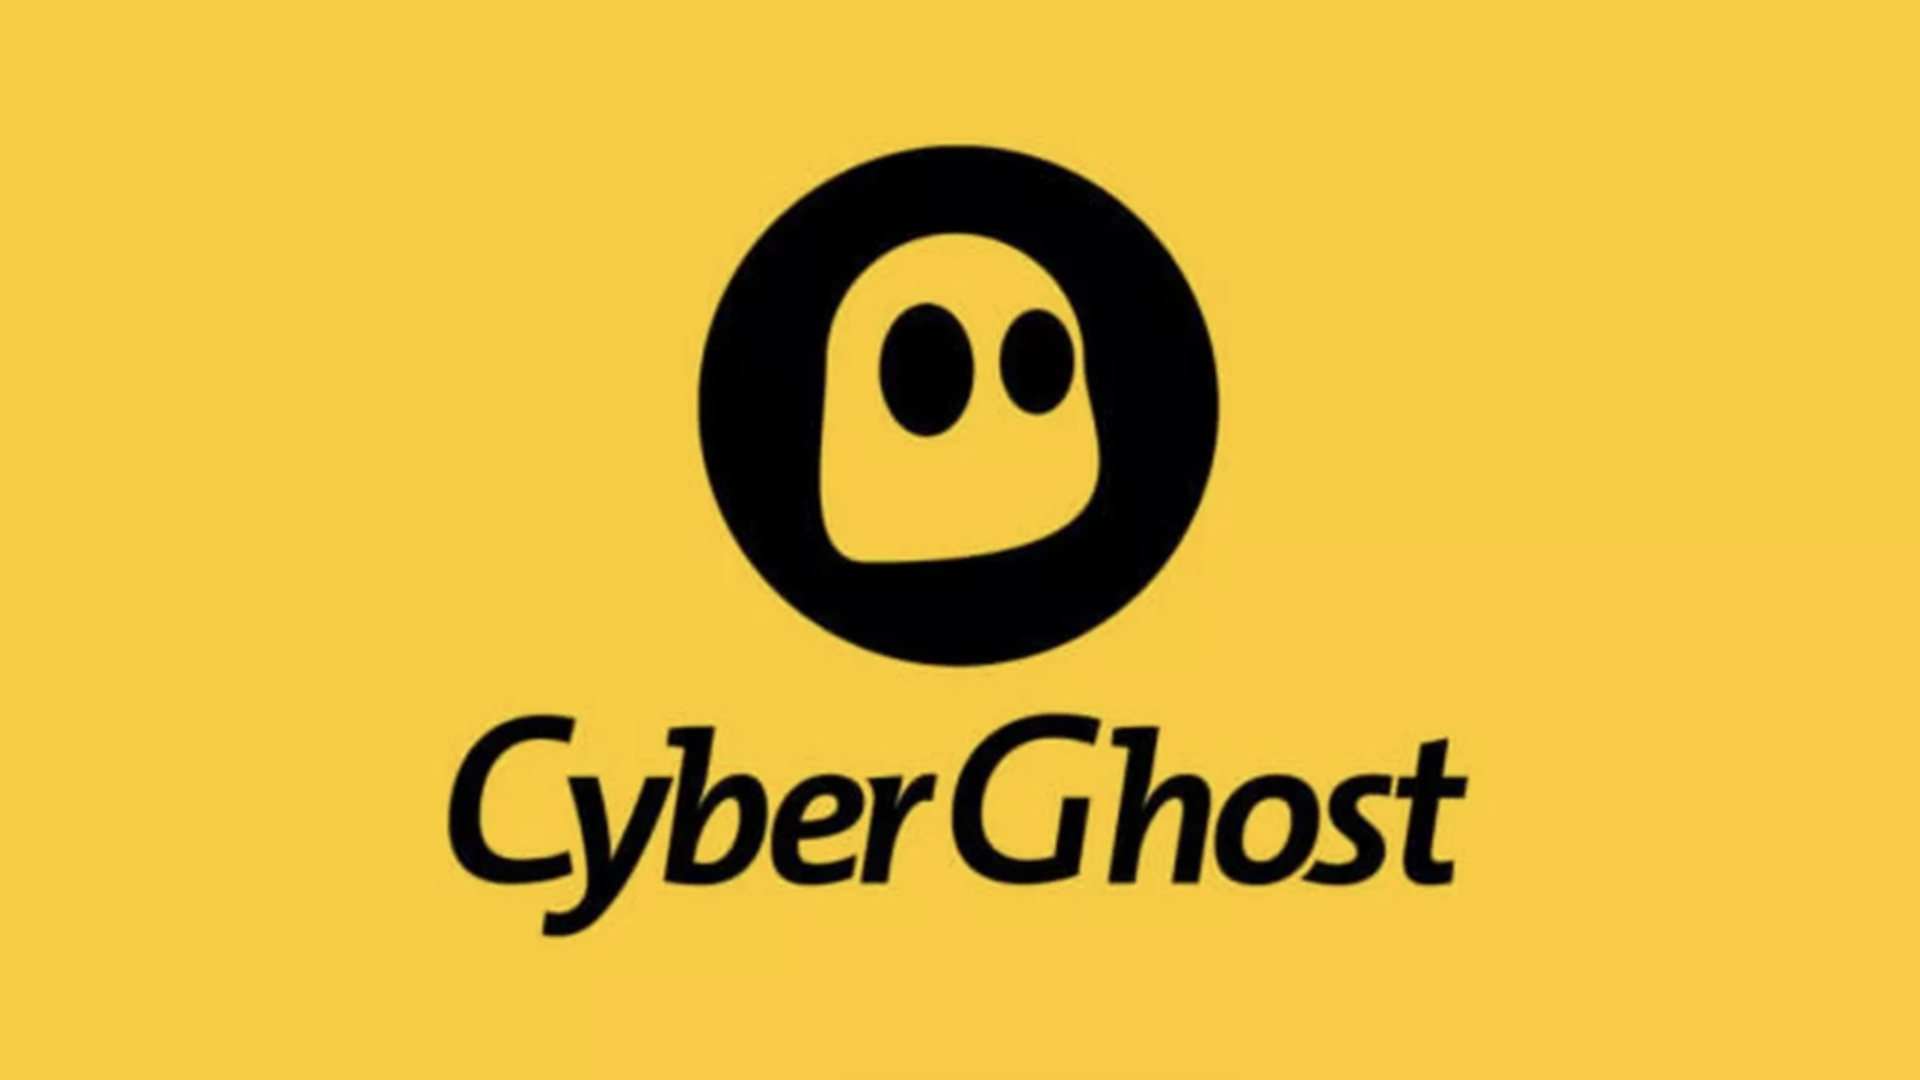 Best VPN apps - Cyberghost. Its logo is yellow and features a picture of a ghost.